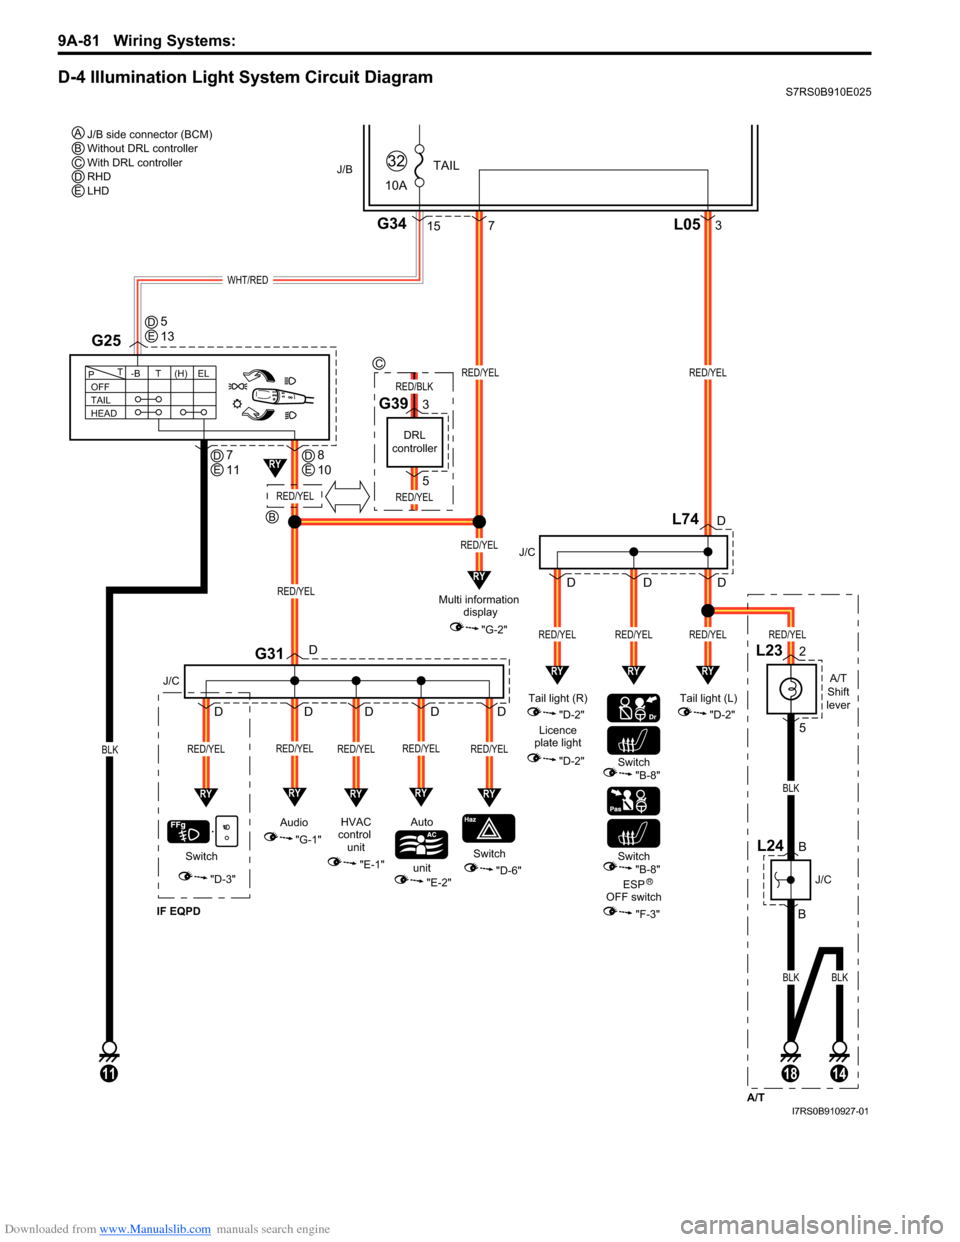 SUZUKI SWIFT 2008 2.G Service Workshop Manual Downloaded from www.Manualslib.com manuals search engine 9A-81 Wiring Systems: 
D-4 Illumination Light System Circuit DiagramS7RS0B910E025
WHT/RED
A/T
Shift
lever
L23
L742
5
BLK
BLKBLK
10A
TAIL
32J/B
